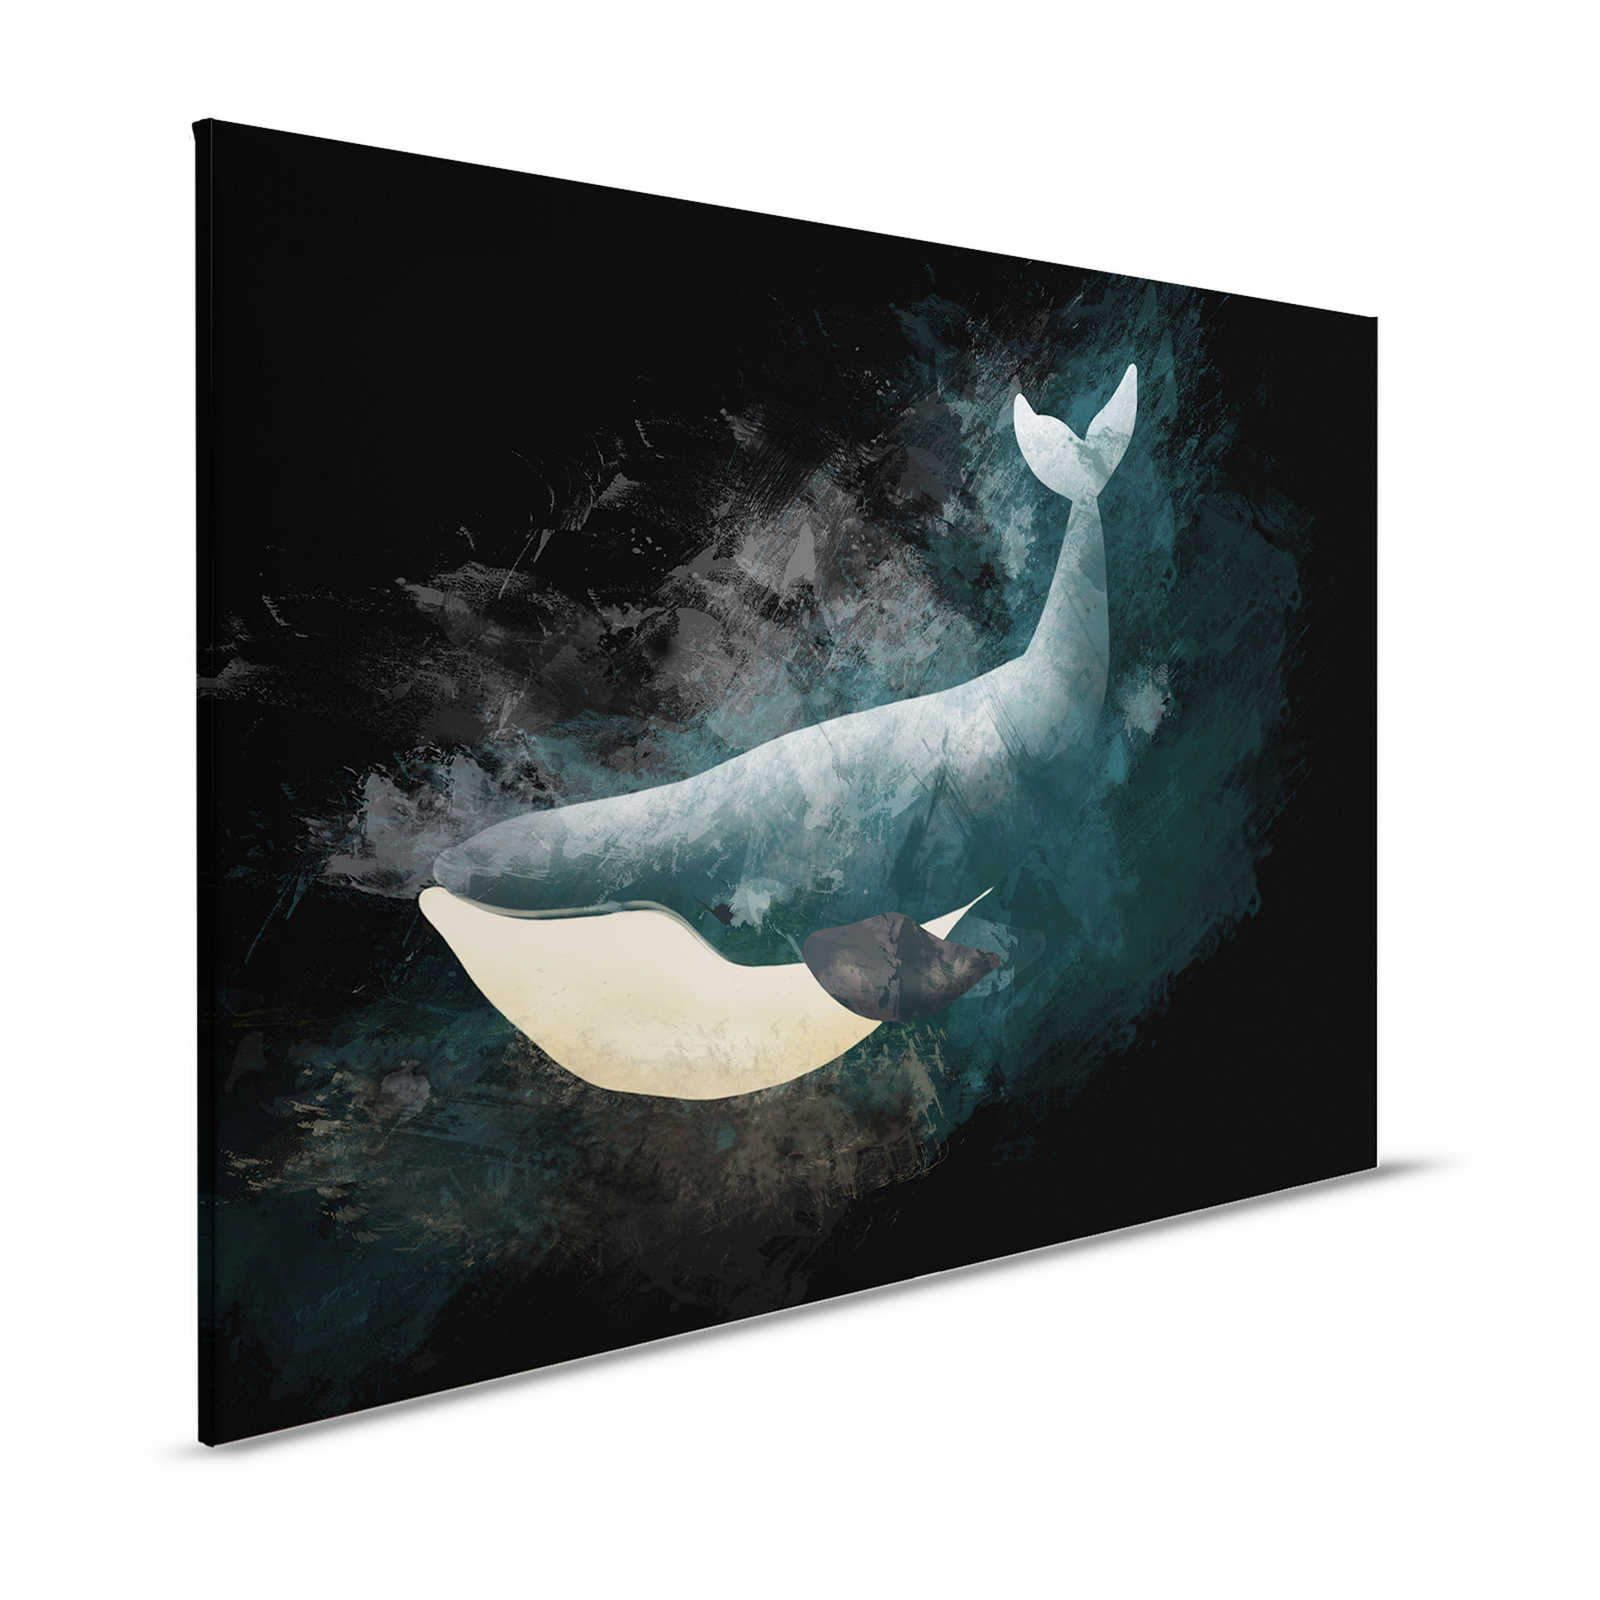 Black Canvas Painting with Whale in Sign Design - 1.20 m x 0.80 m
